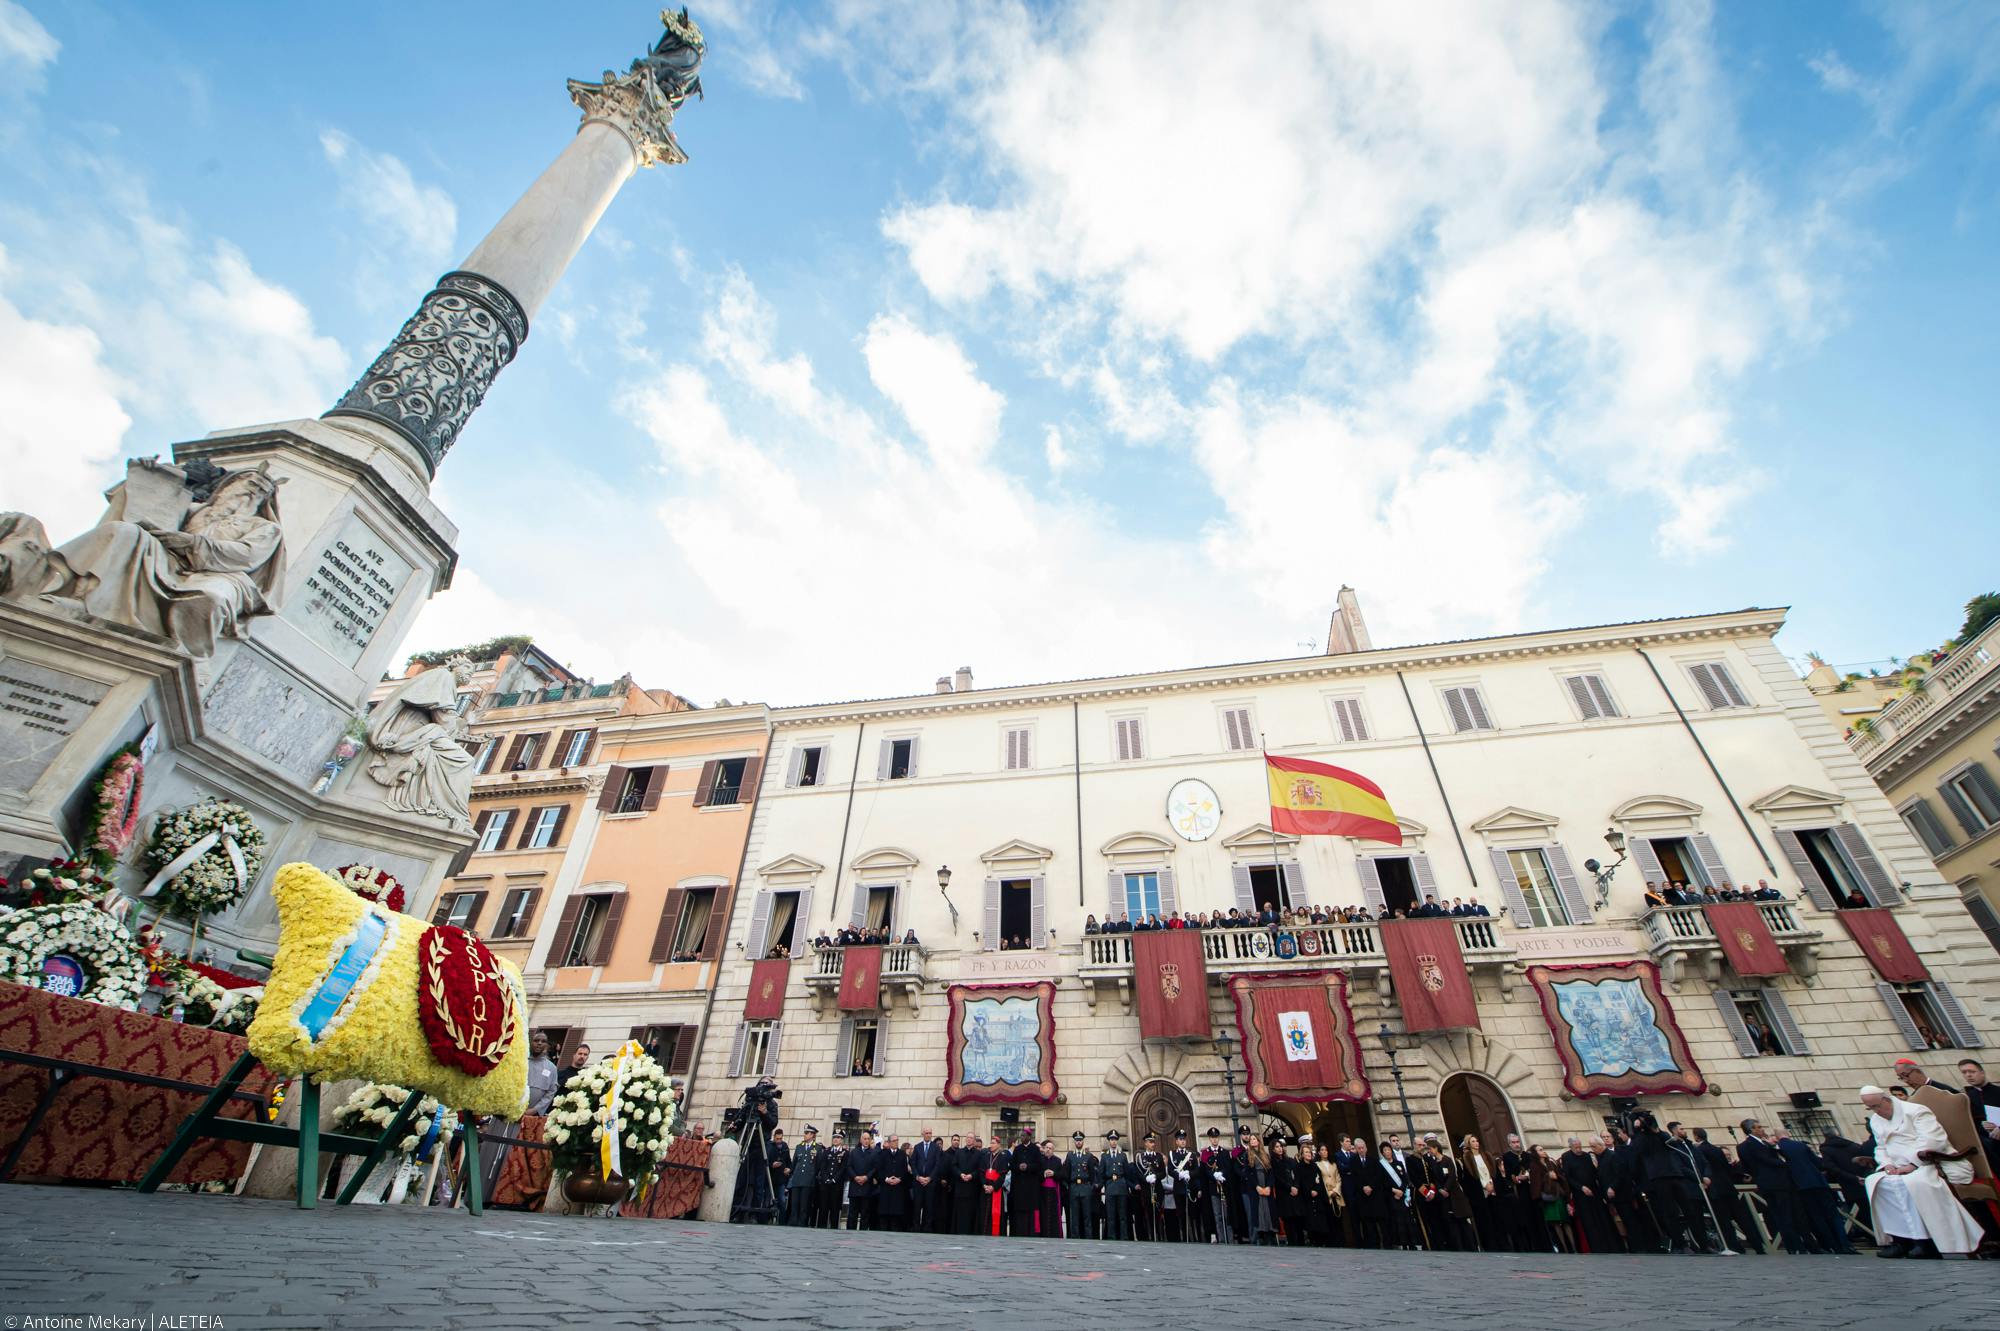 Pope Francis to honor the Immaculate Conception in Piazza di Spagna on December 8